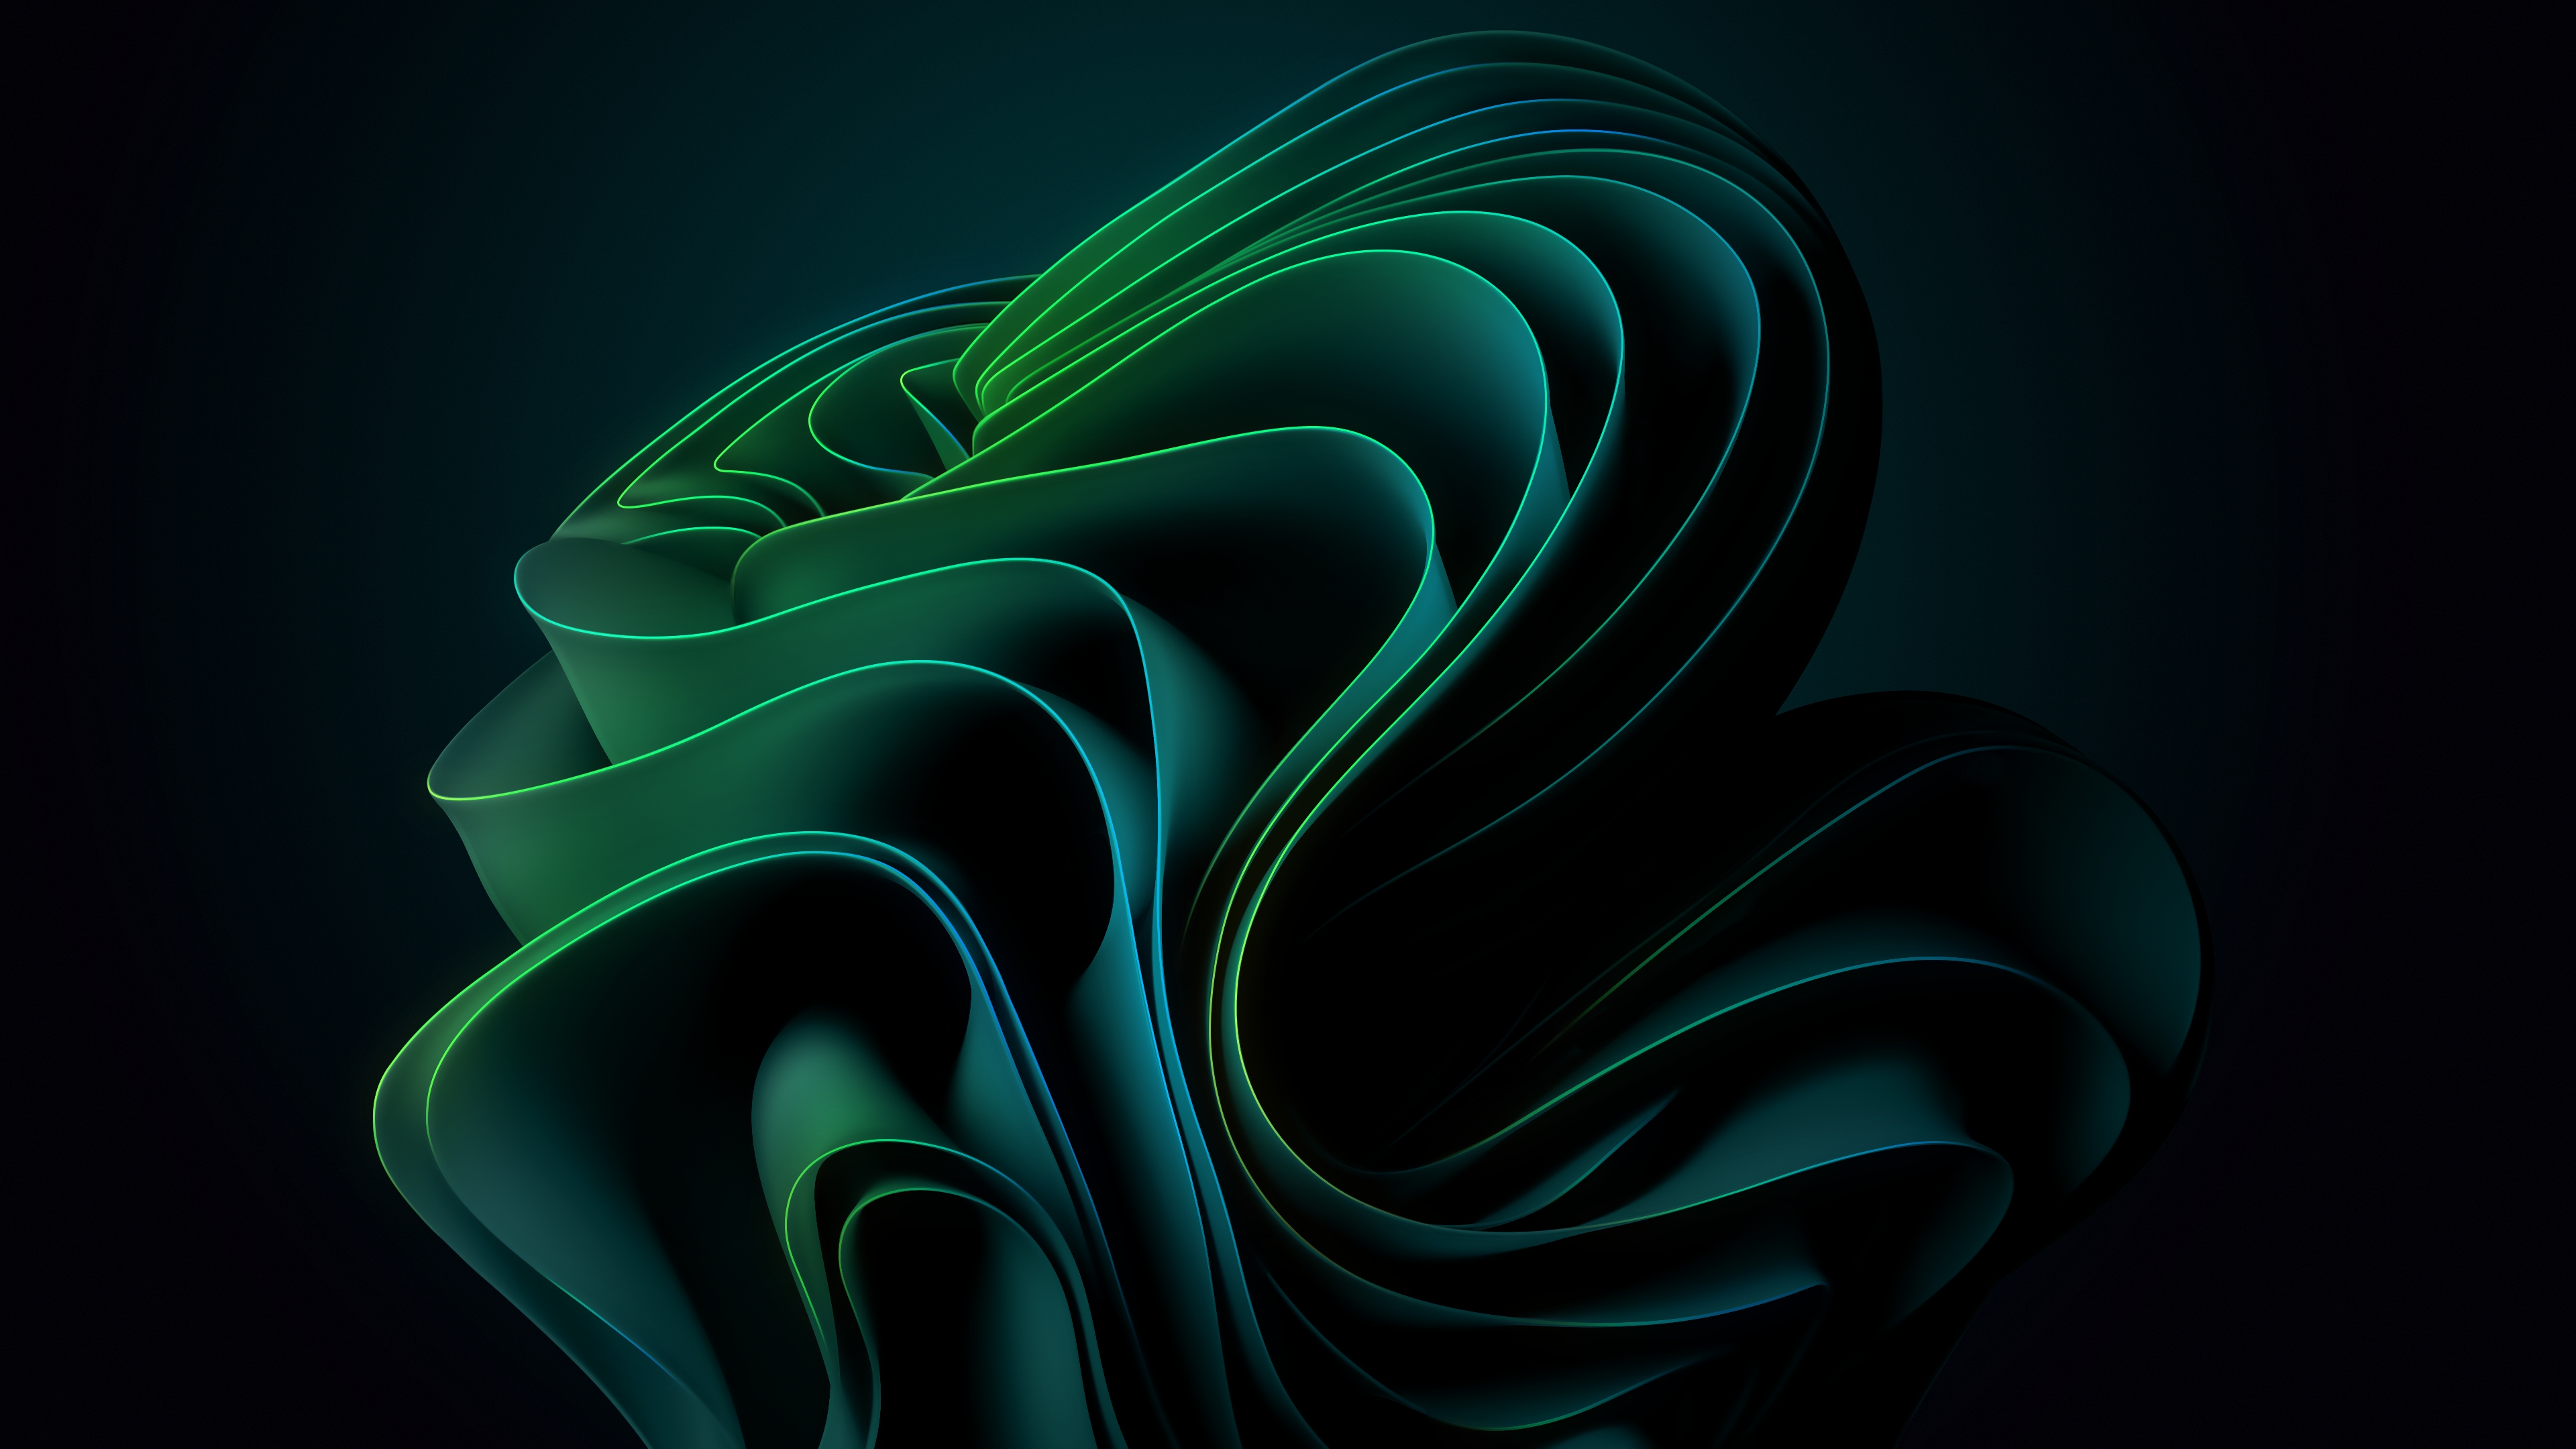 Green abstract wave